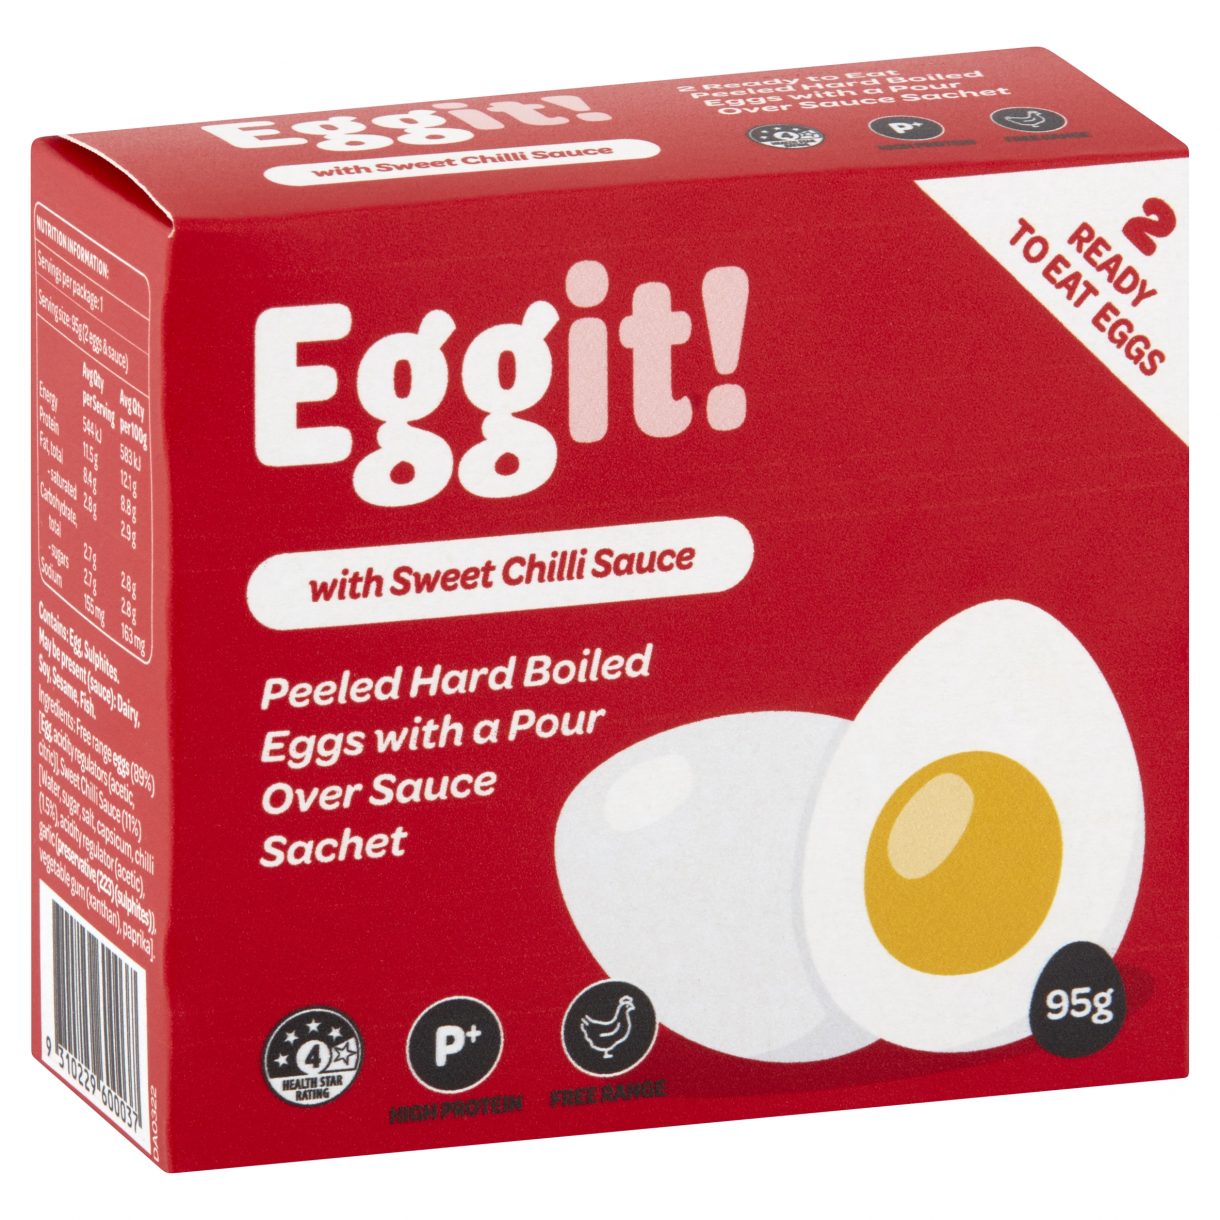 Eggit with Sweet Chilli sauce